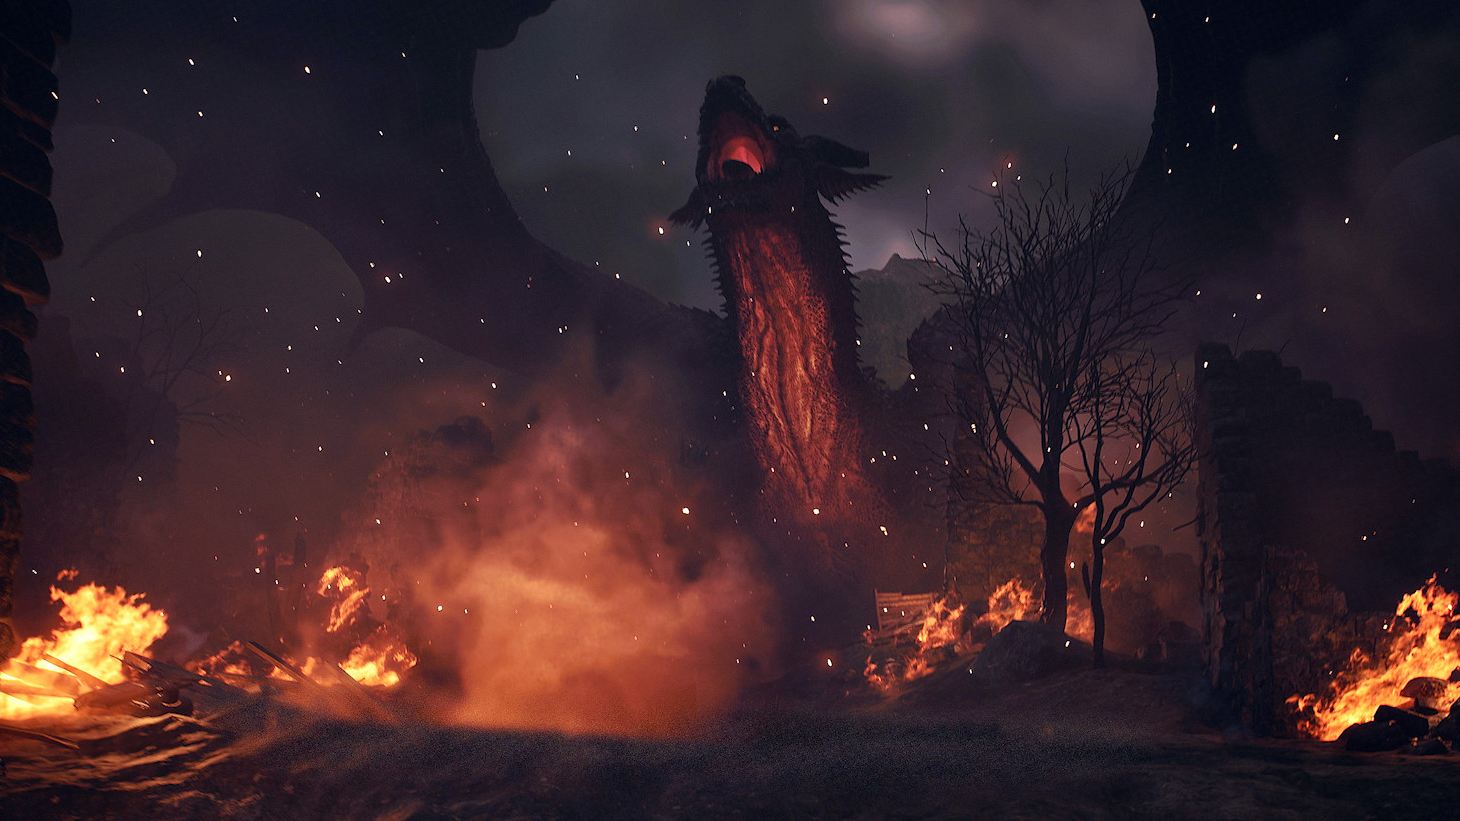 Dragon's Dogma 2 Release Date: A Dragon can be seen